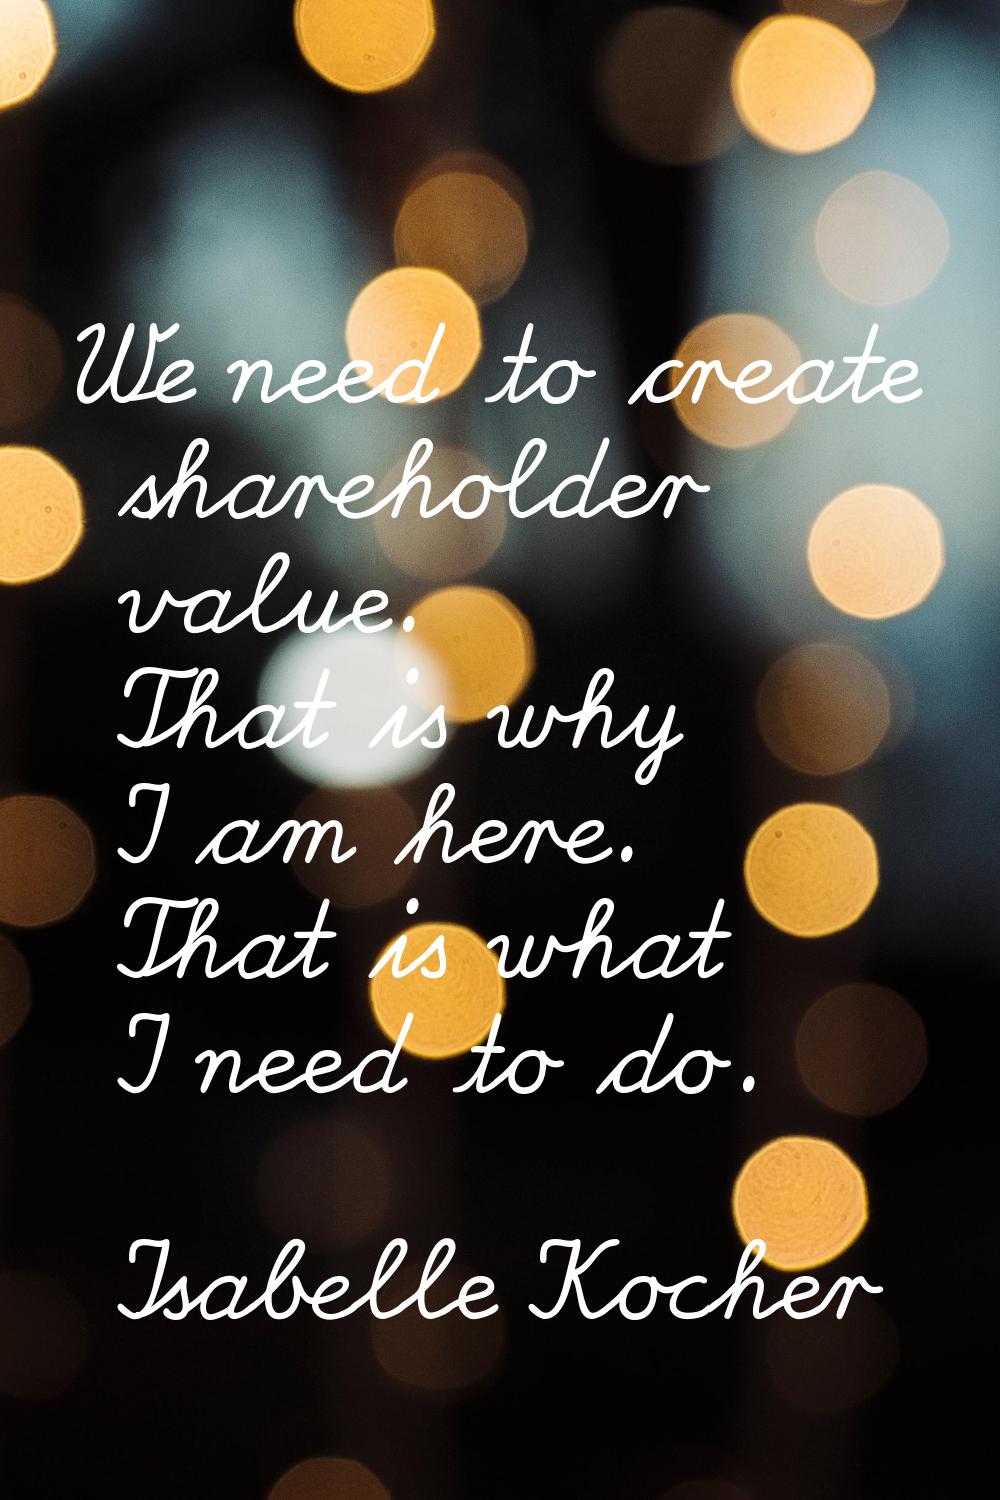 We need to create shareholder value. That is why I am here. That is what I need to do.